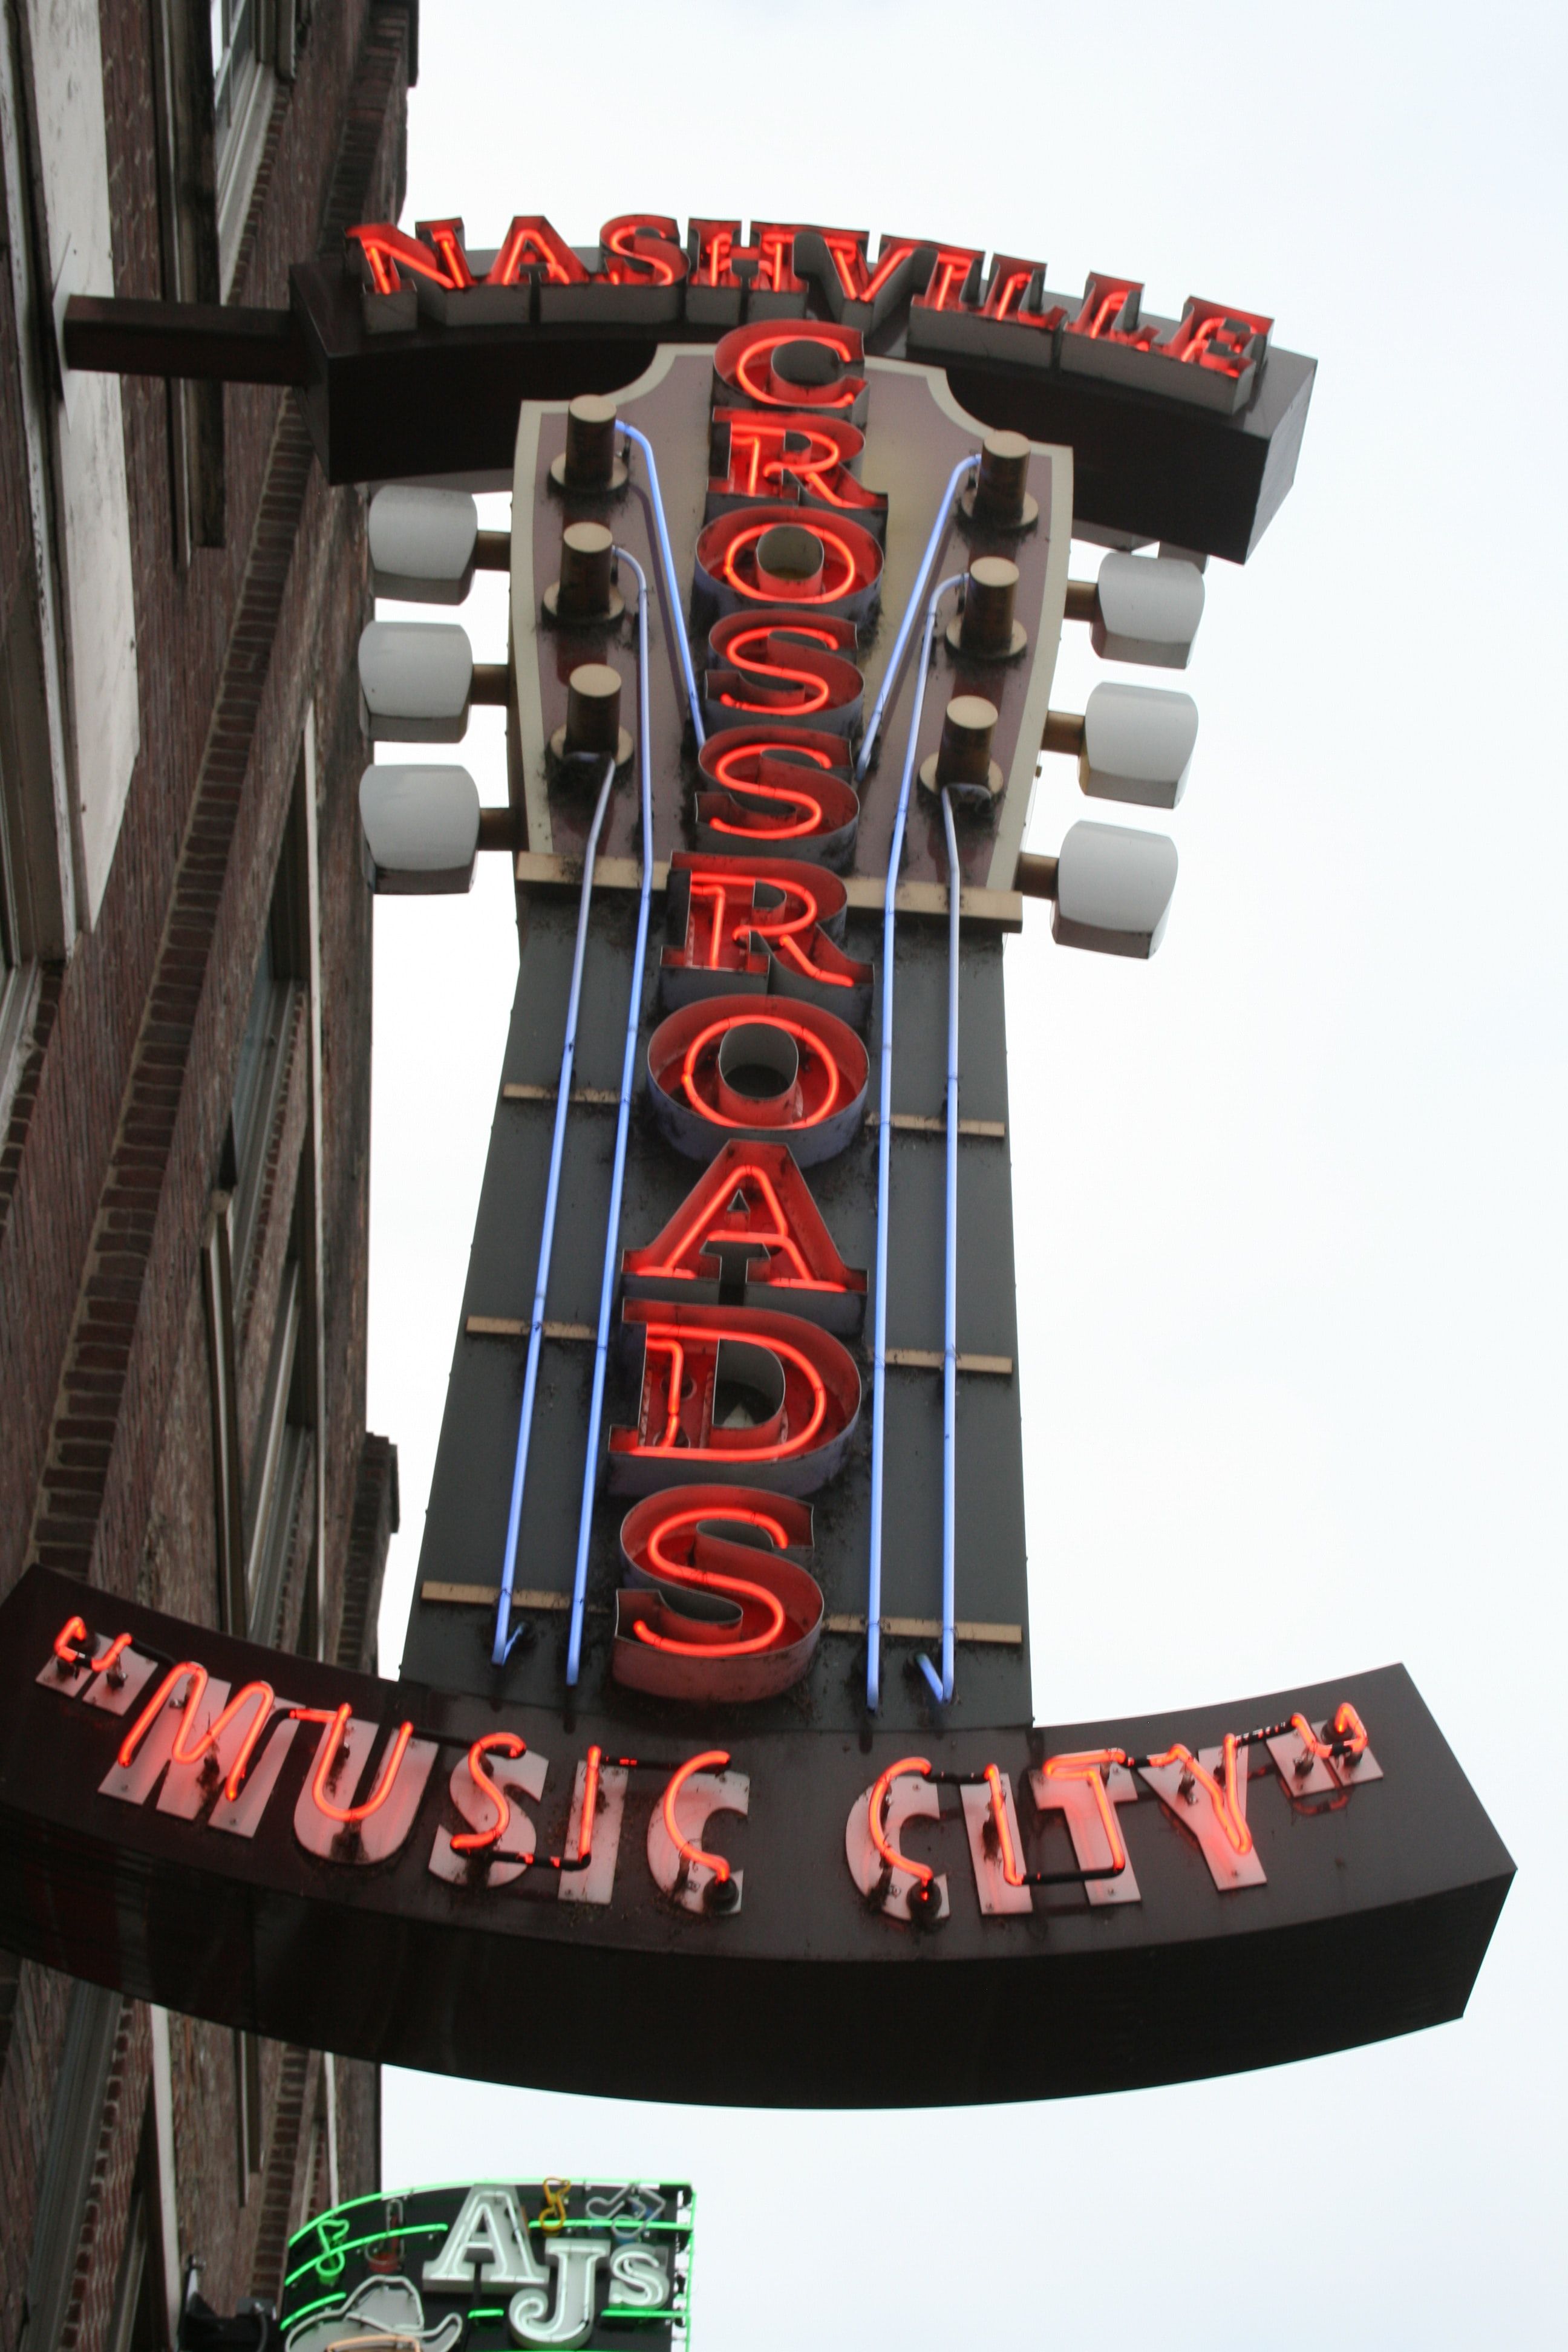 Signs along the streets of Music City in Nashville, Tennessee